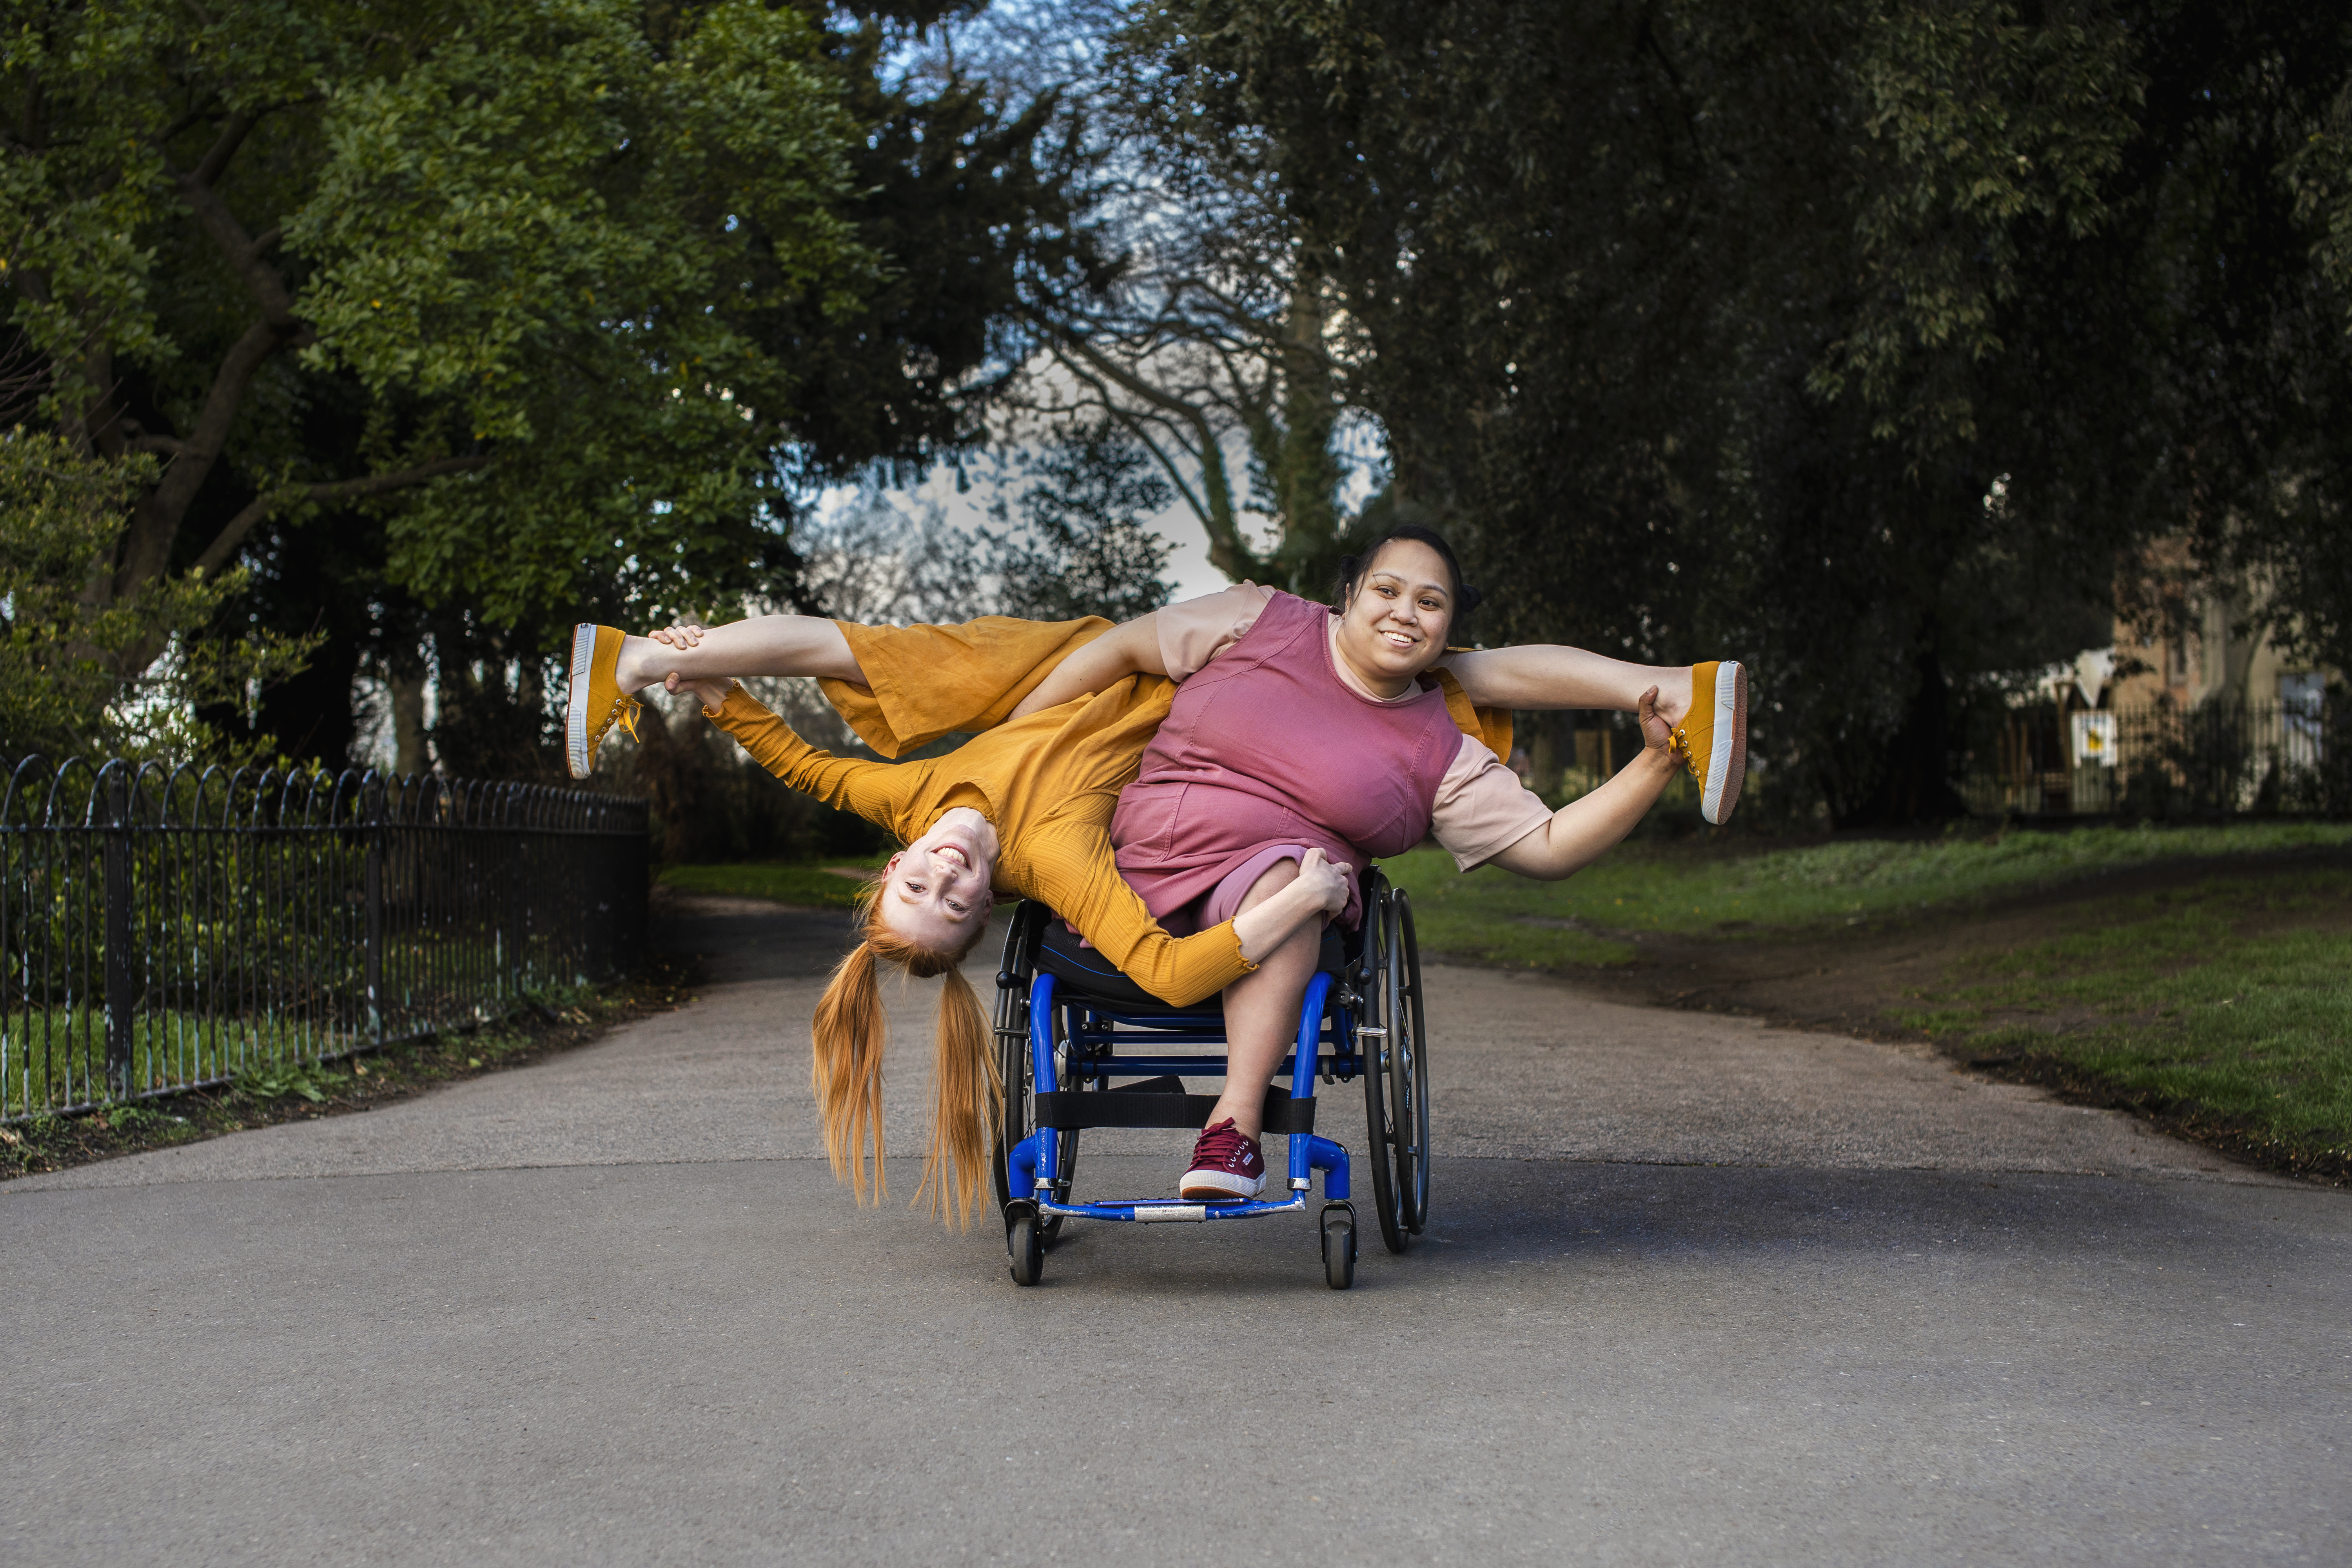 Two women create a pose, one woman uses a wheelchair and the other woman is held upside down alongside her